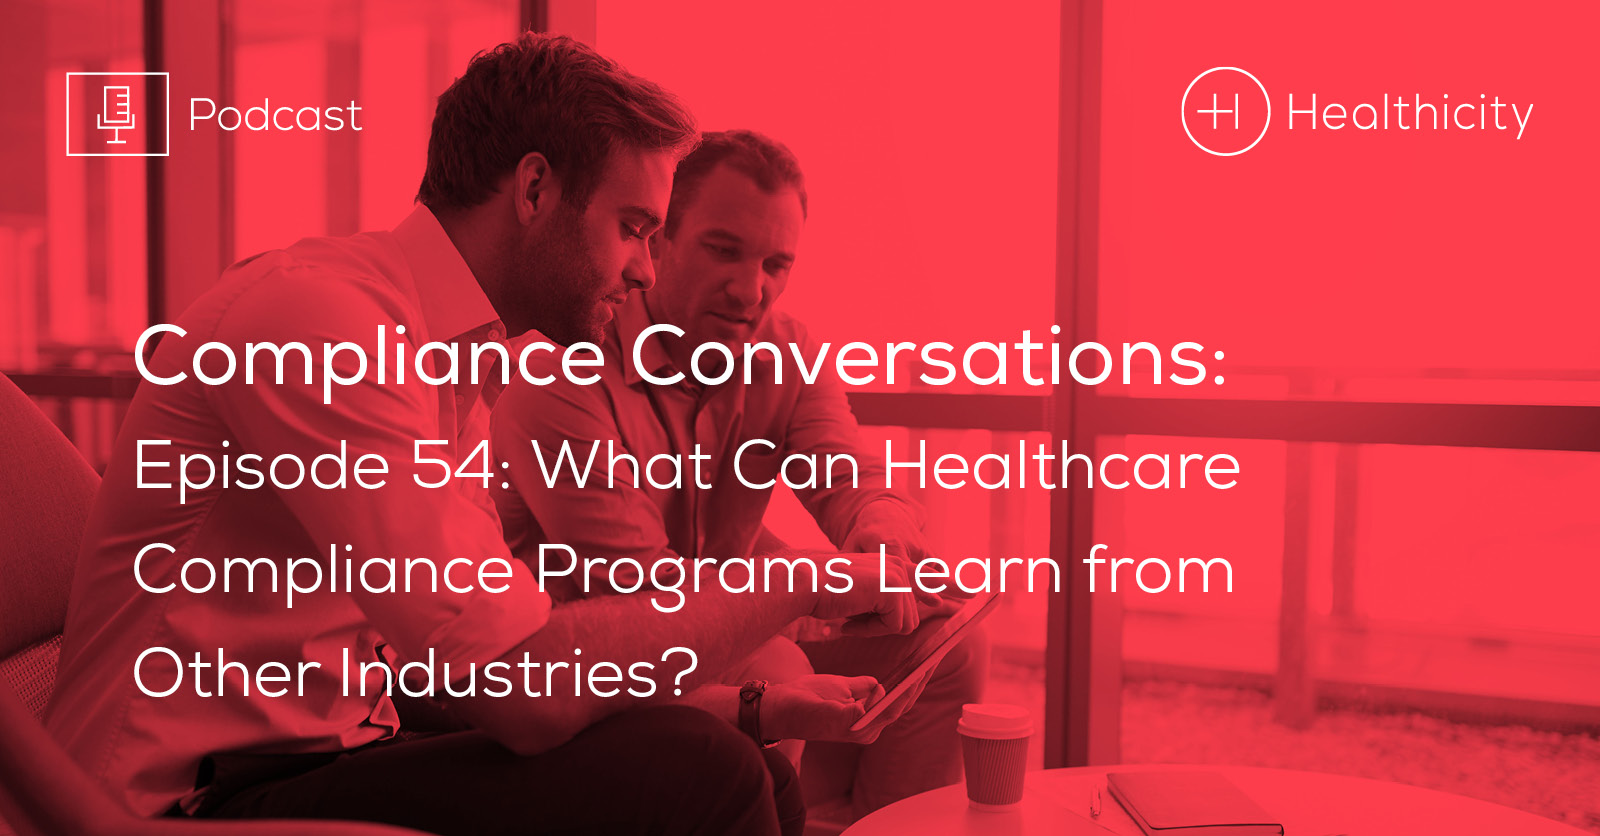 Listen to the Episode - What Can Healthcare Compliance Programs Learn from Other Industries?